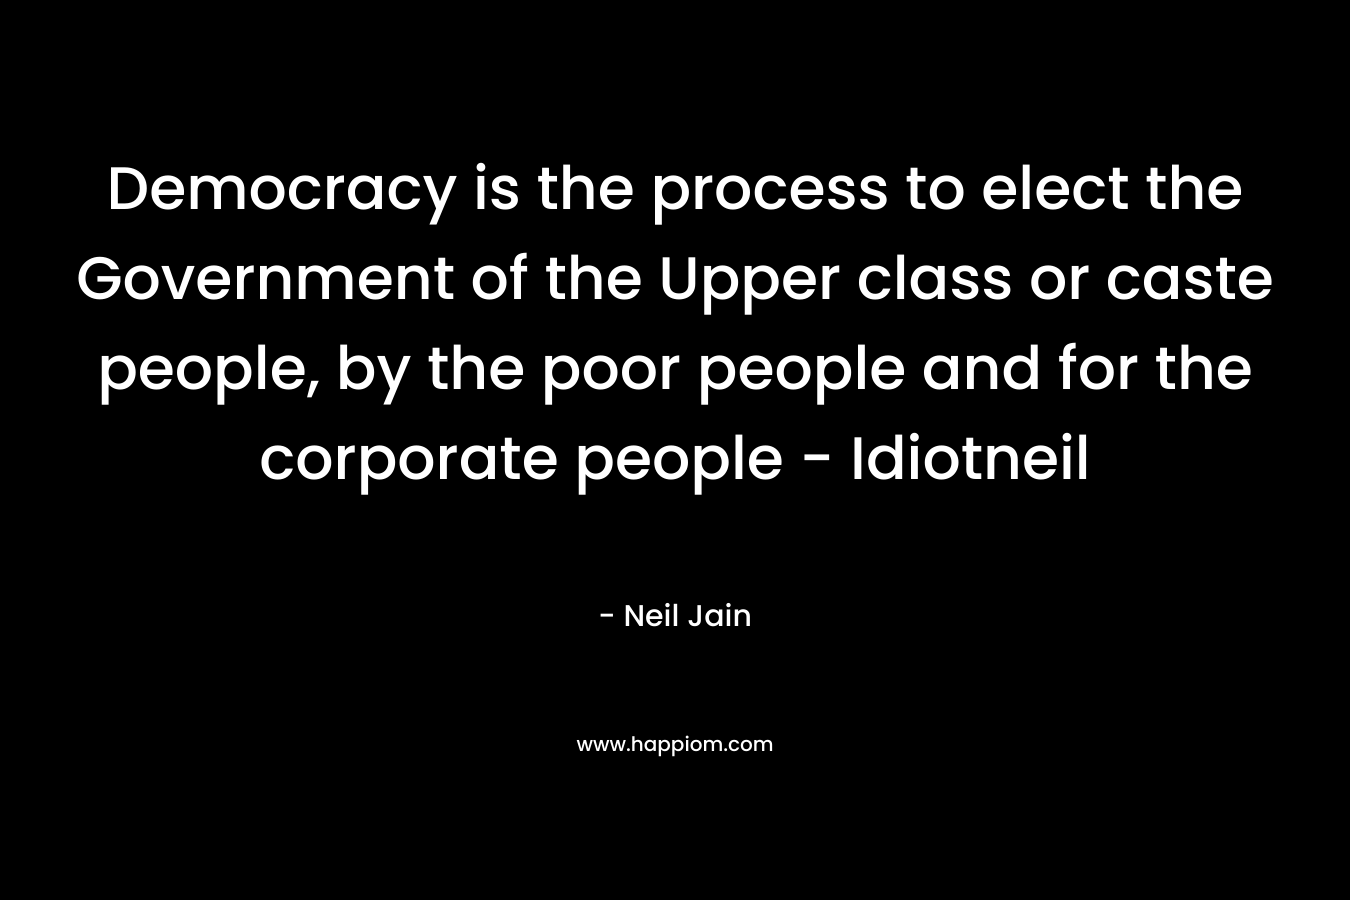 Democracy is the process to elect the Government of the Upper class or caste people, by the poor people and for the corporate people – Idiotneil – Neil Jain